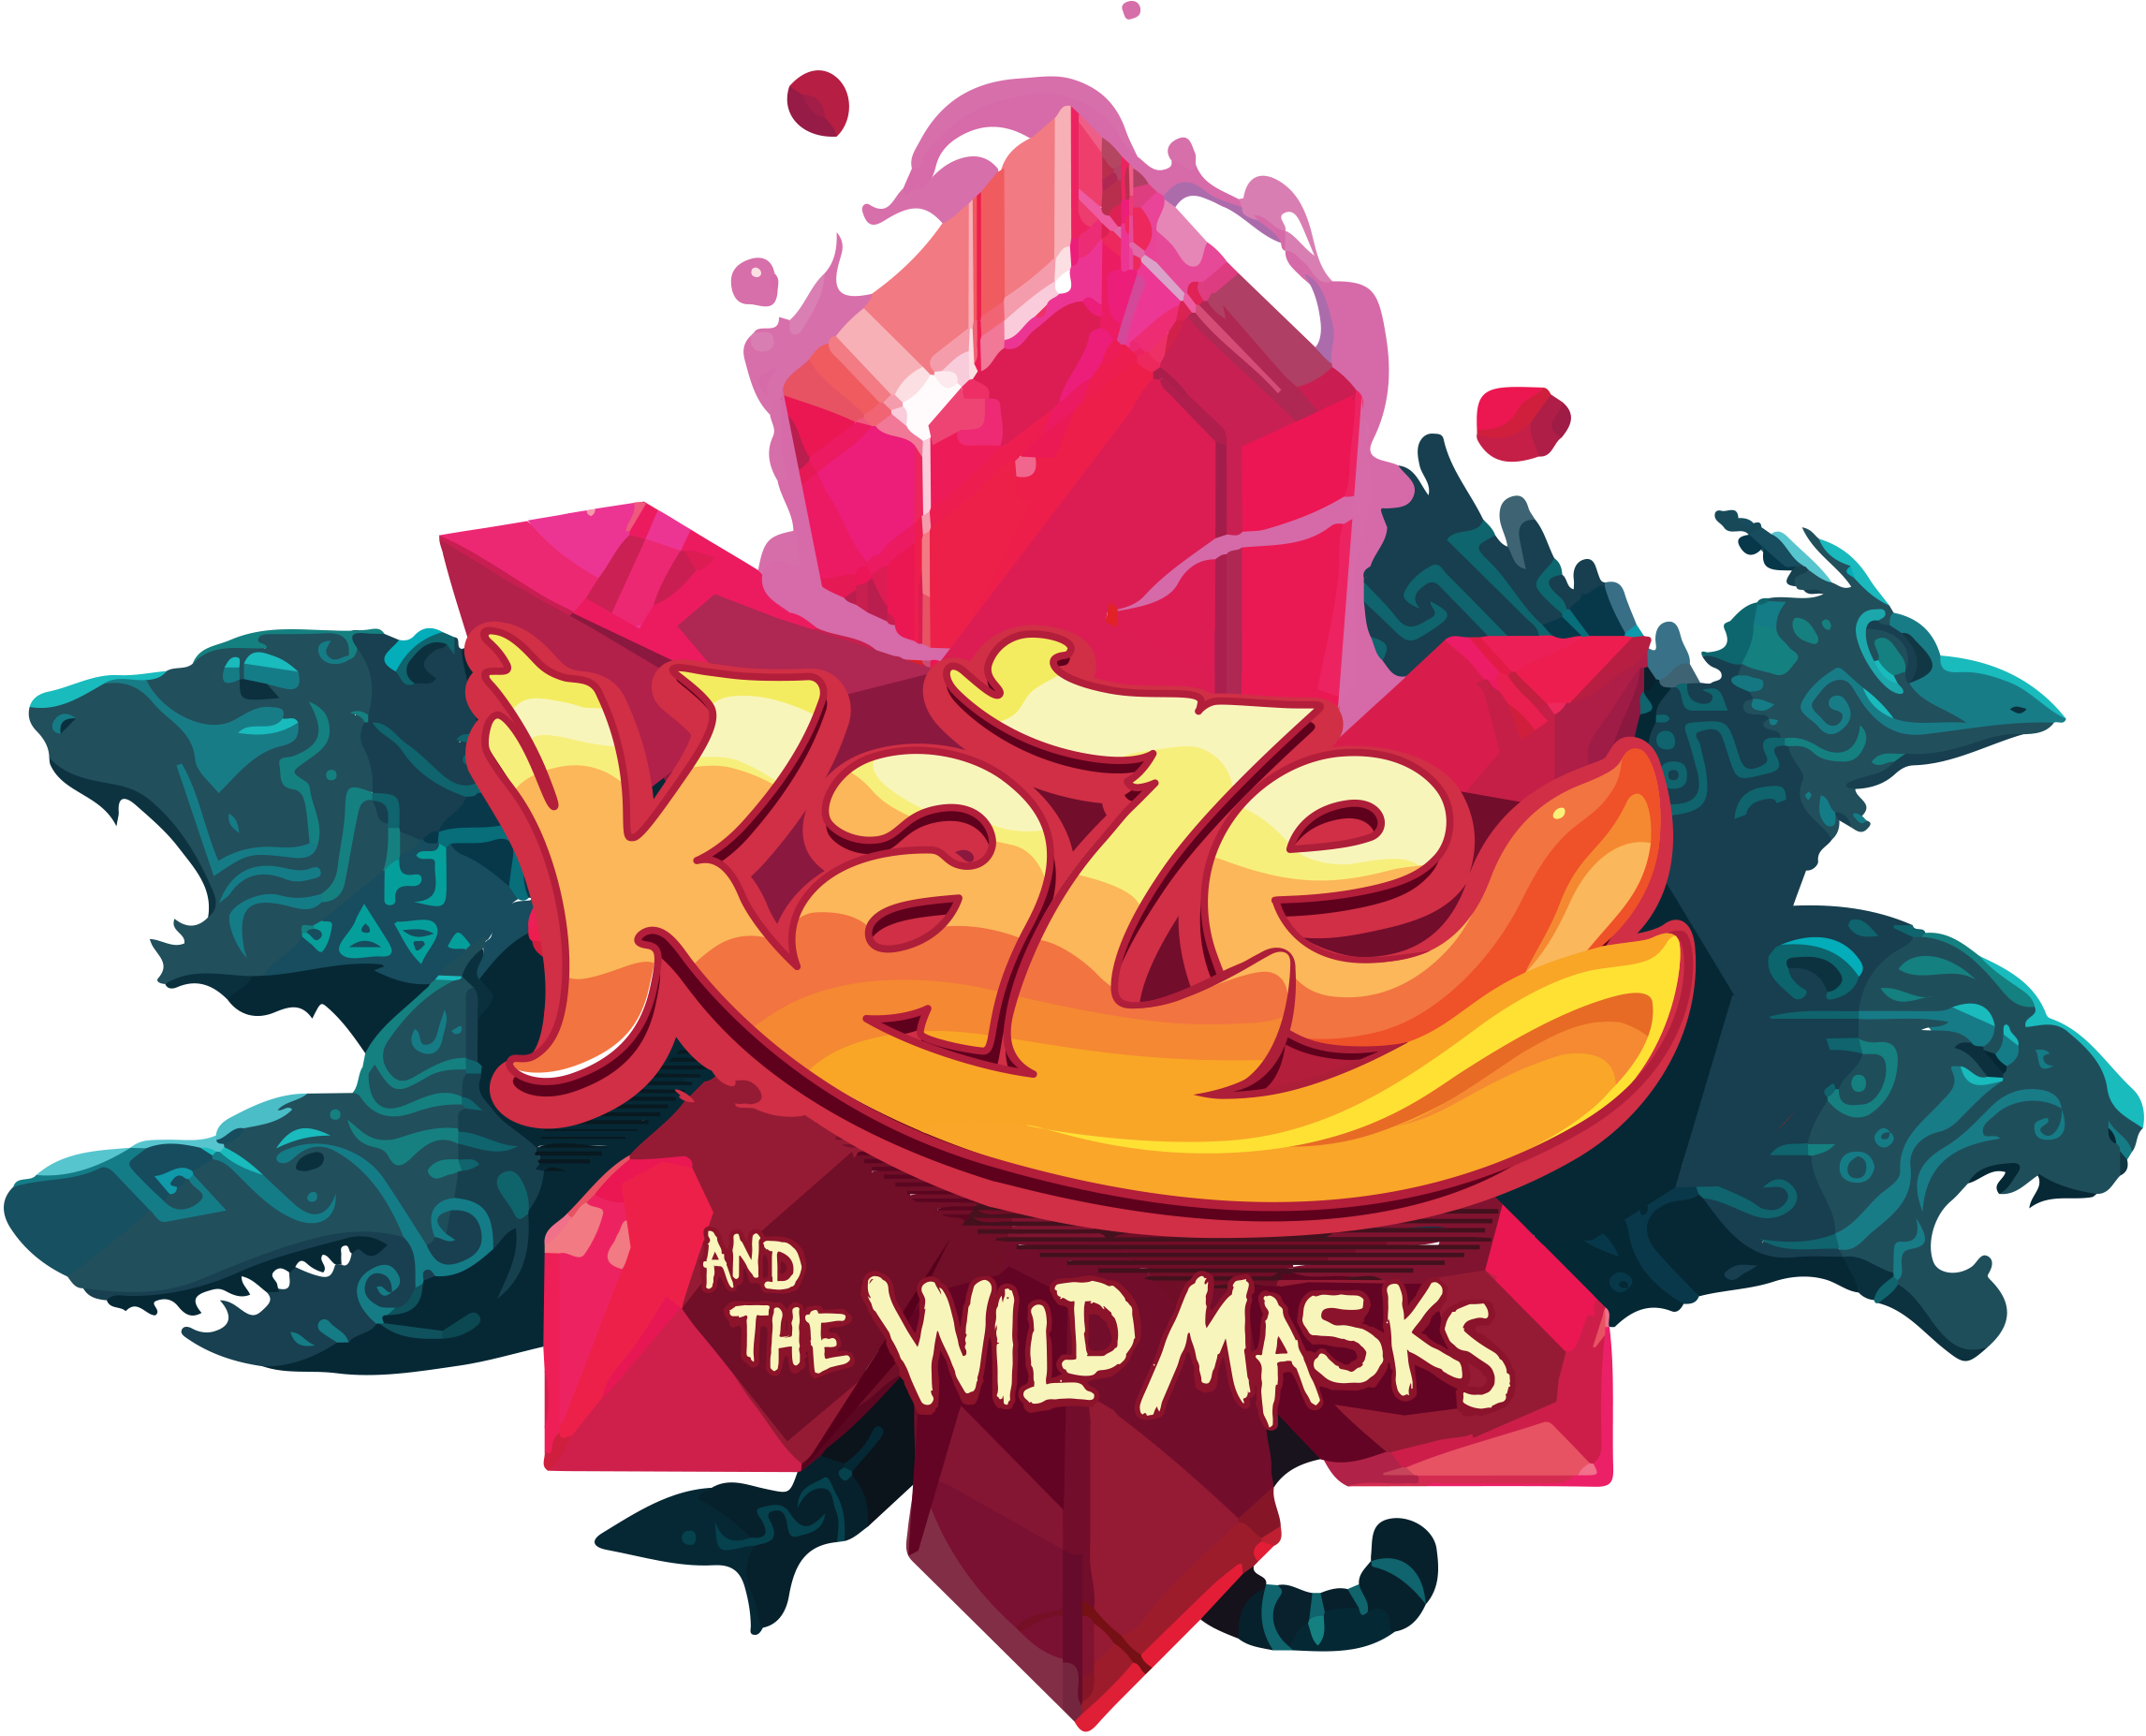 Kaze and the Wild Masks Wallpapers